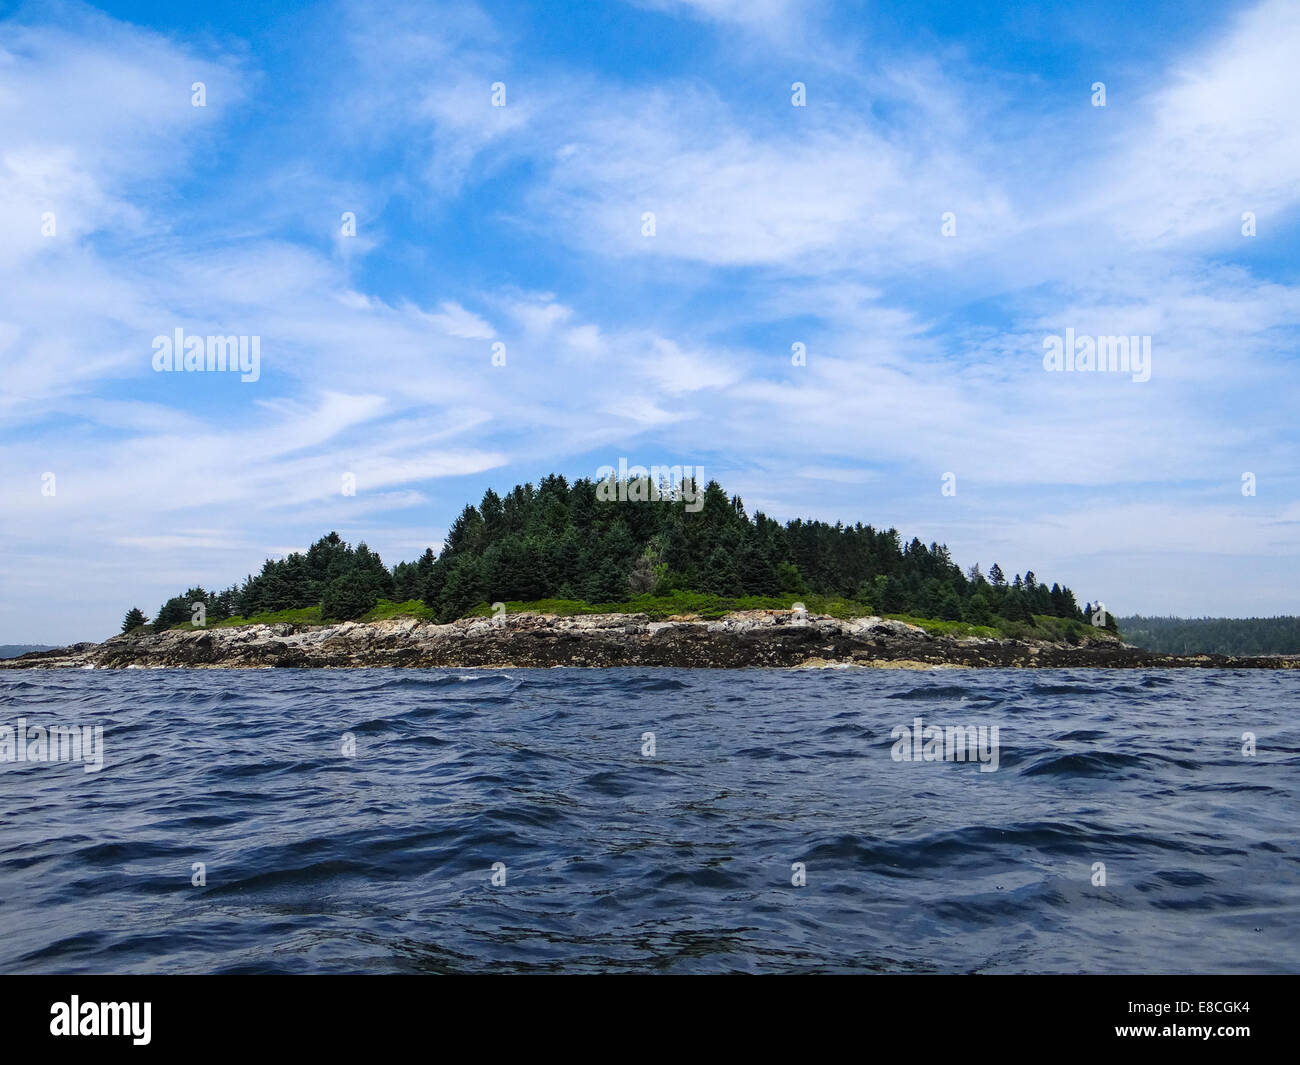 Folly Island, Maine Folly Island, a preserve owned by the Maine Coast Heritage Trust, is about 7 acres in size. It is located in Bartlett Narrows, along the western coast of Mount Desert Island. Bar Harbor, ME, USA Stock Photo